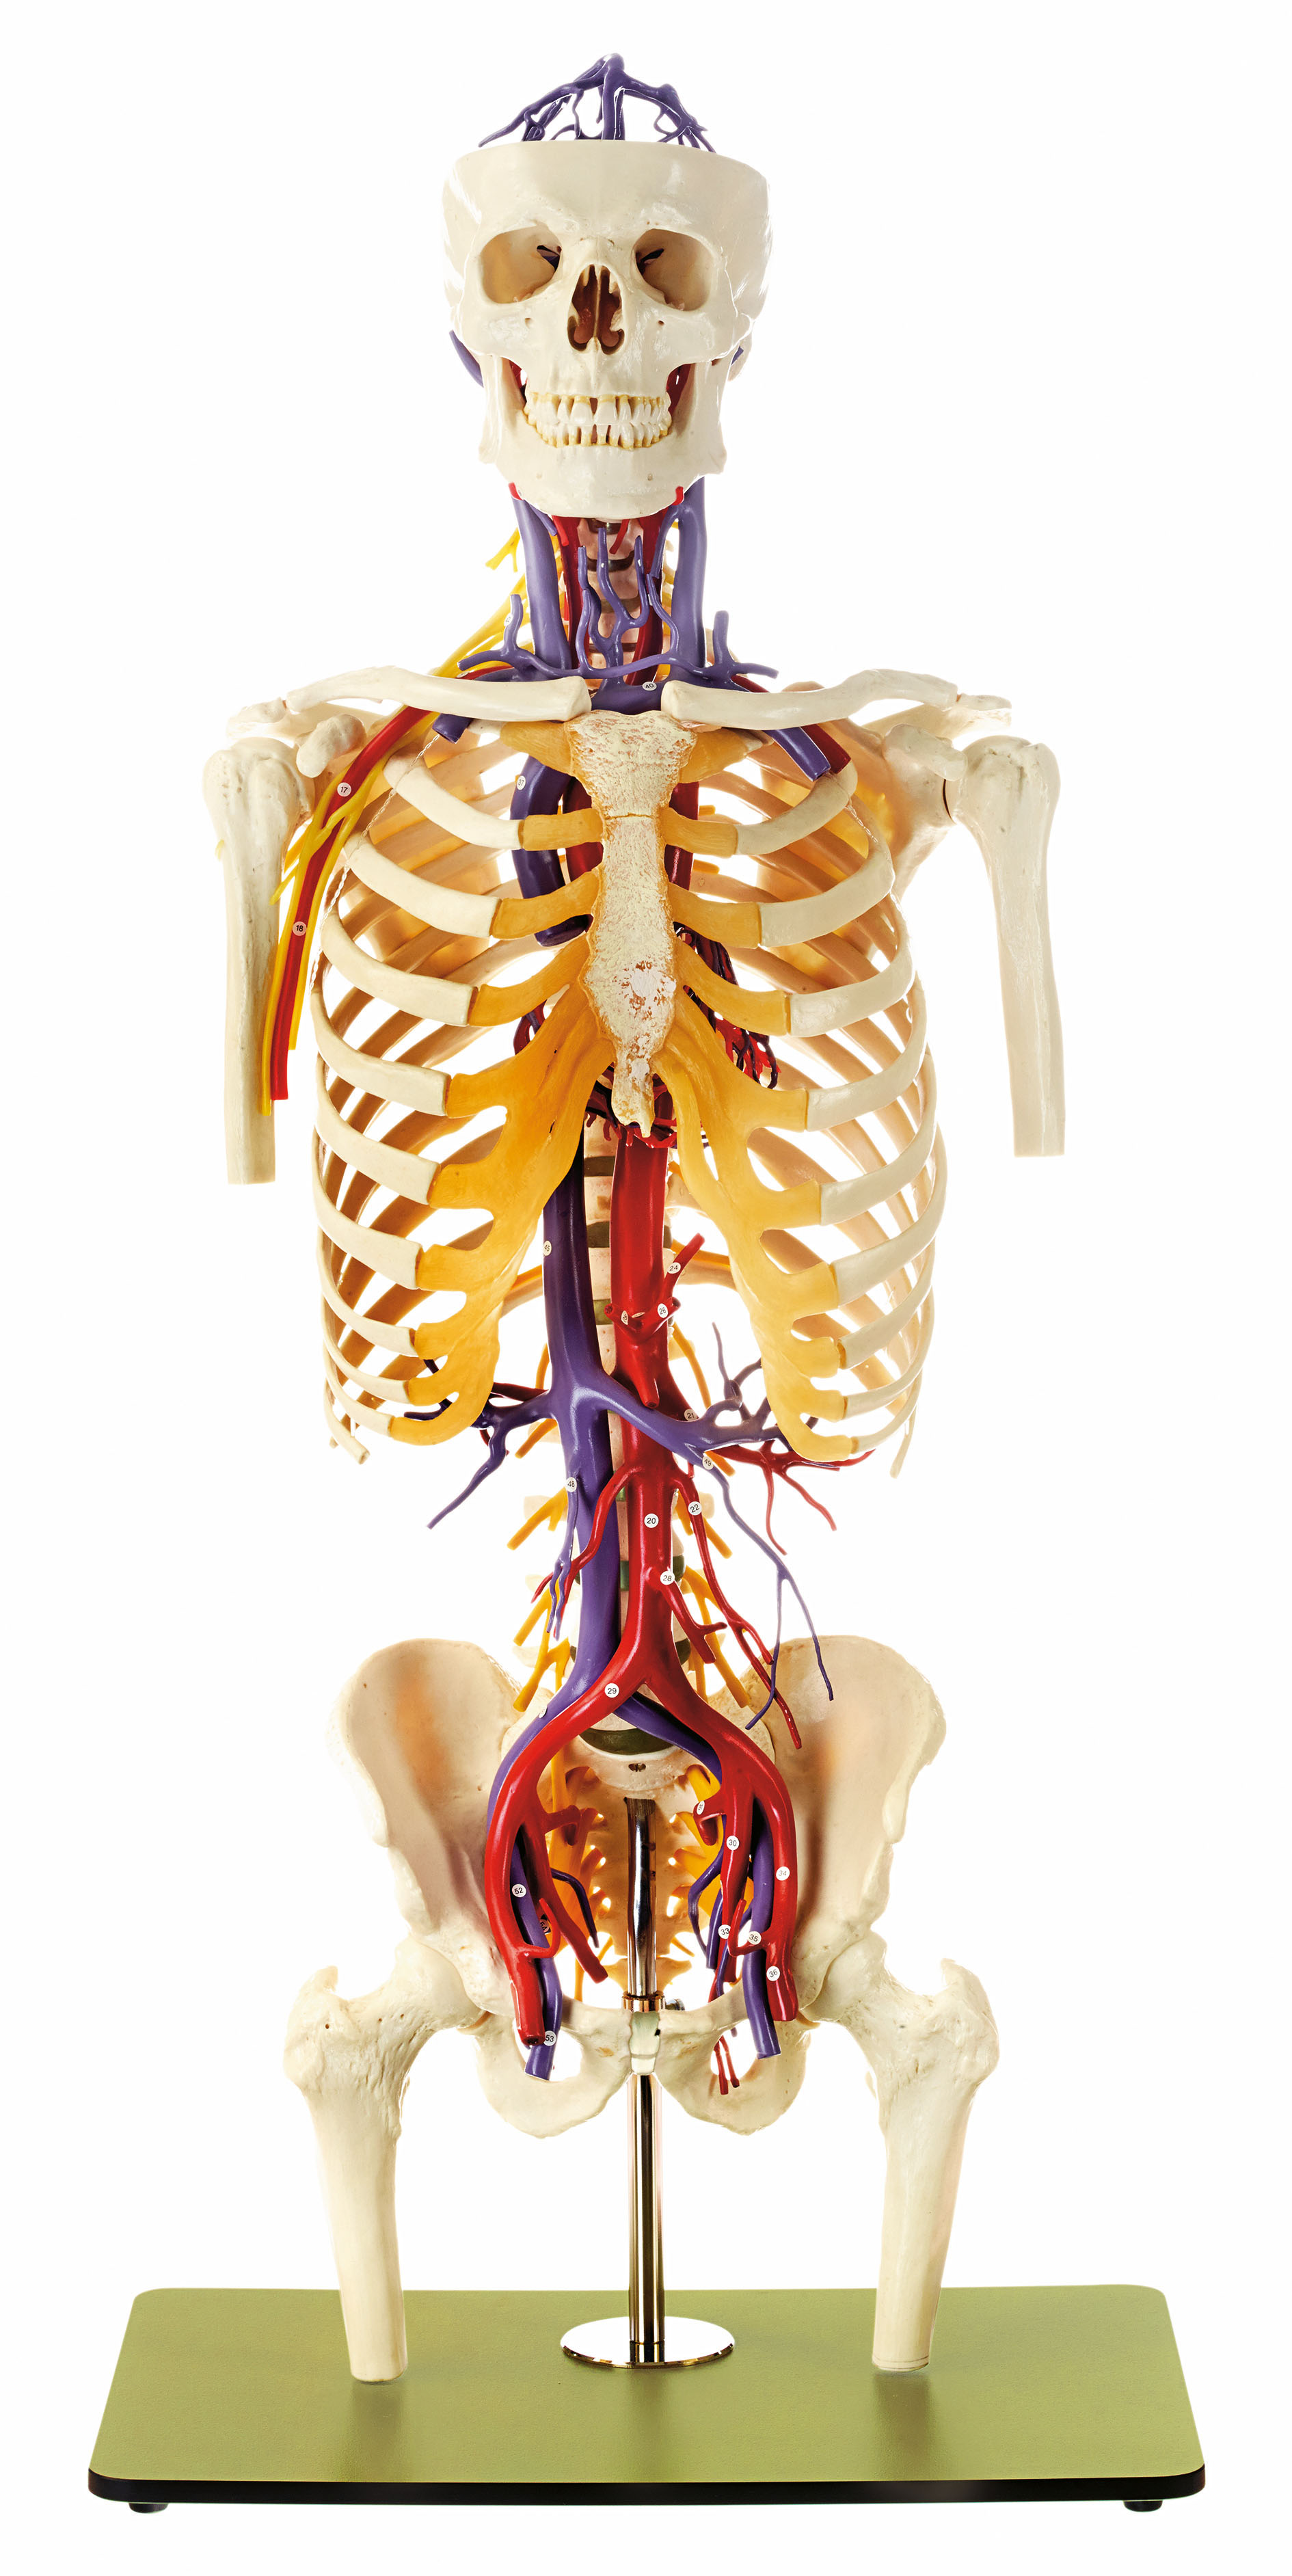 Transparent Torso Model With Blood Vessels and Head